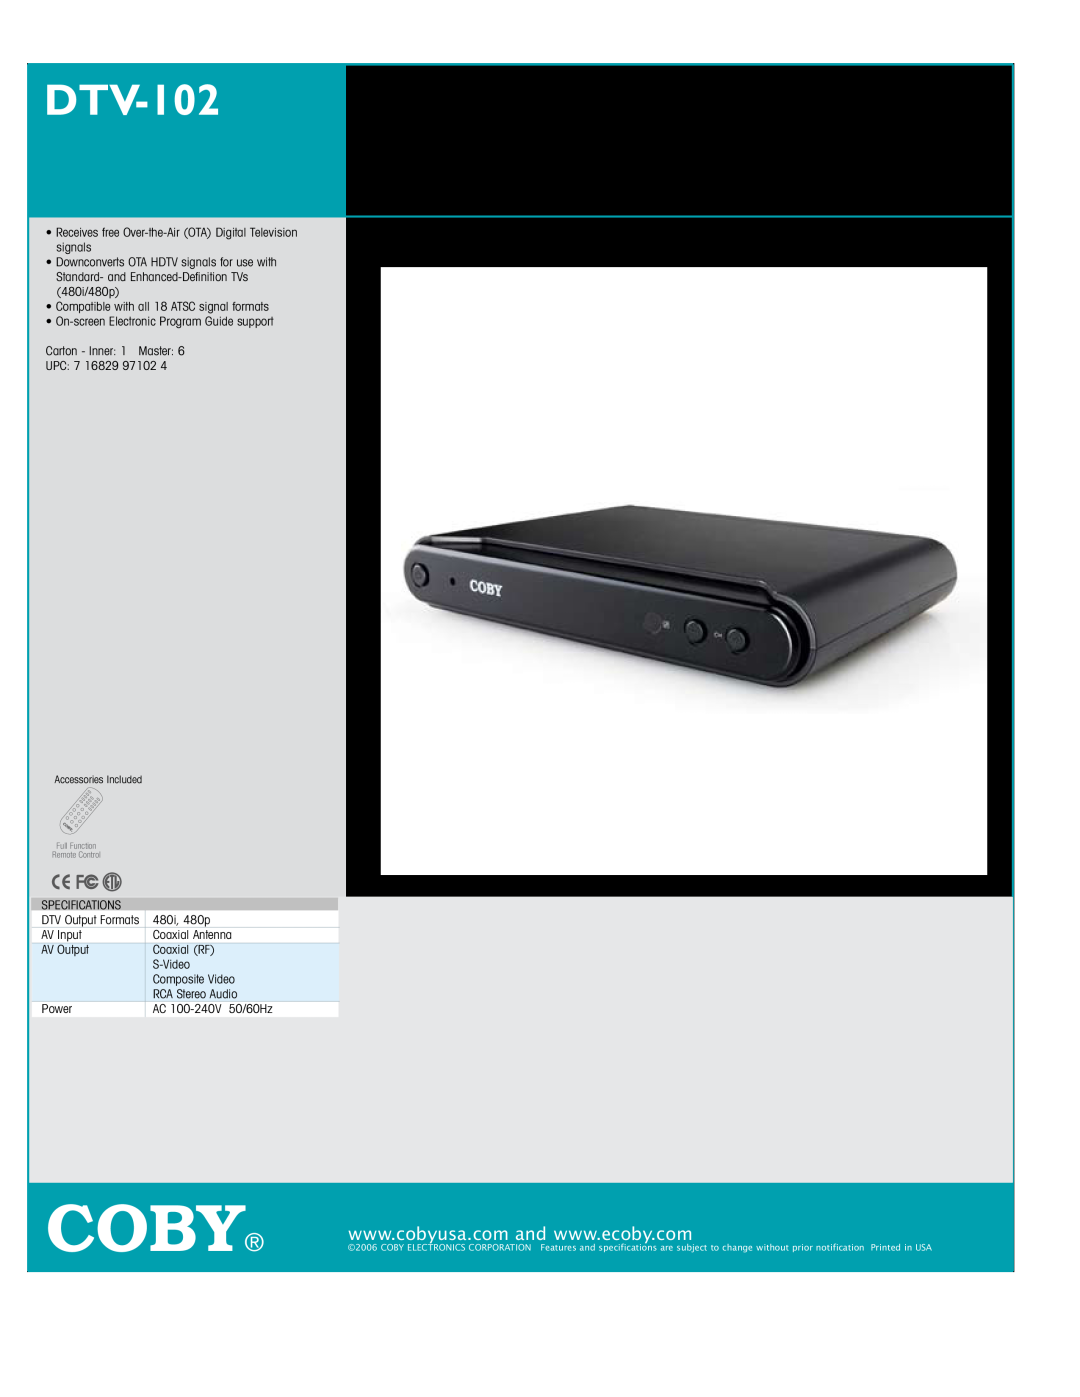 COBY electronic DTV102 specifications Coby, DTV-102 ATSC STANDARD-DEFINITION CONVERTER BOX 